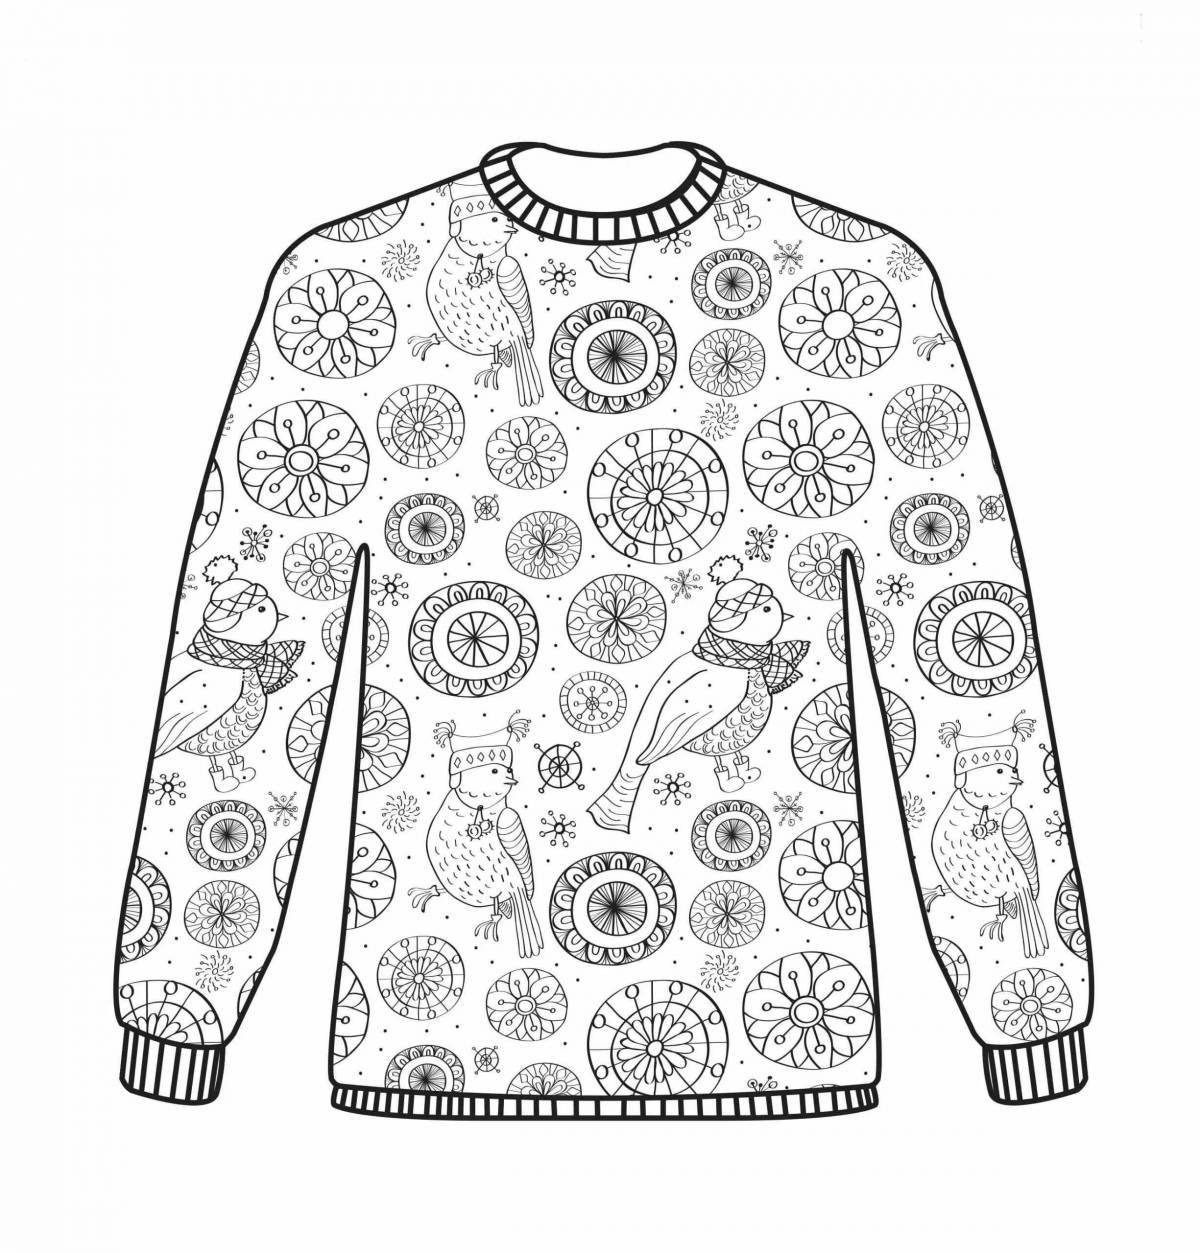 Coloring page with funny jumper